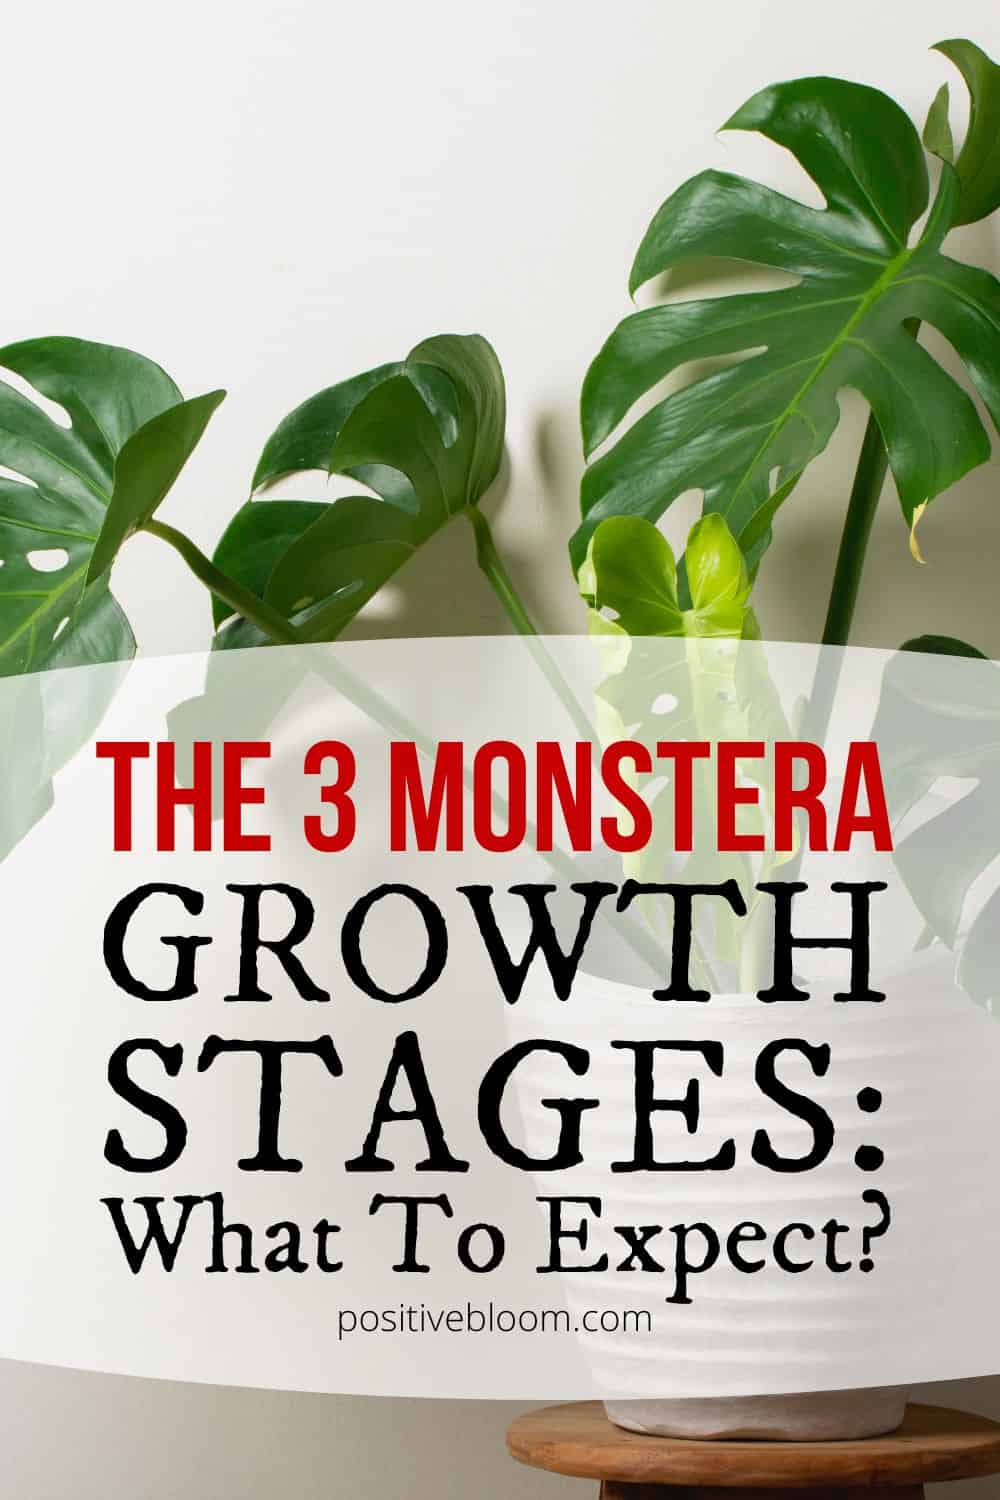 The 3 Monstera Growth Stages And What To Expect From Them